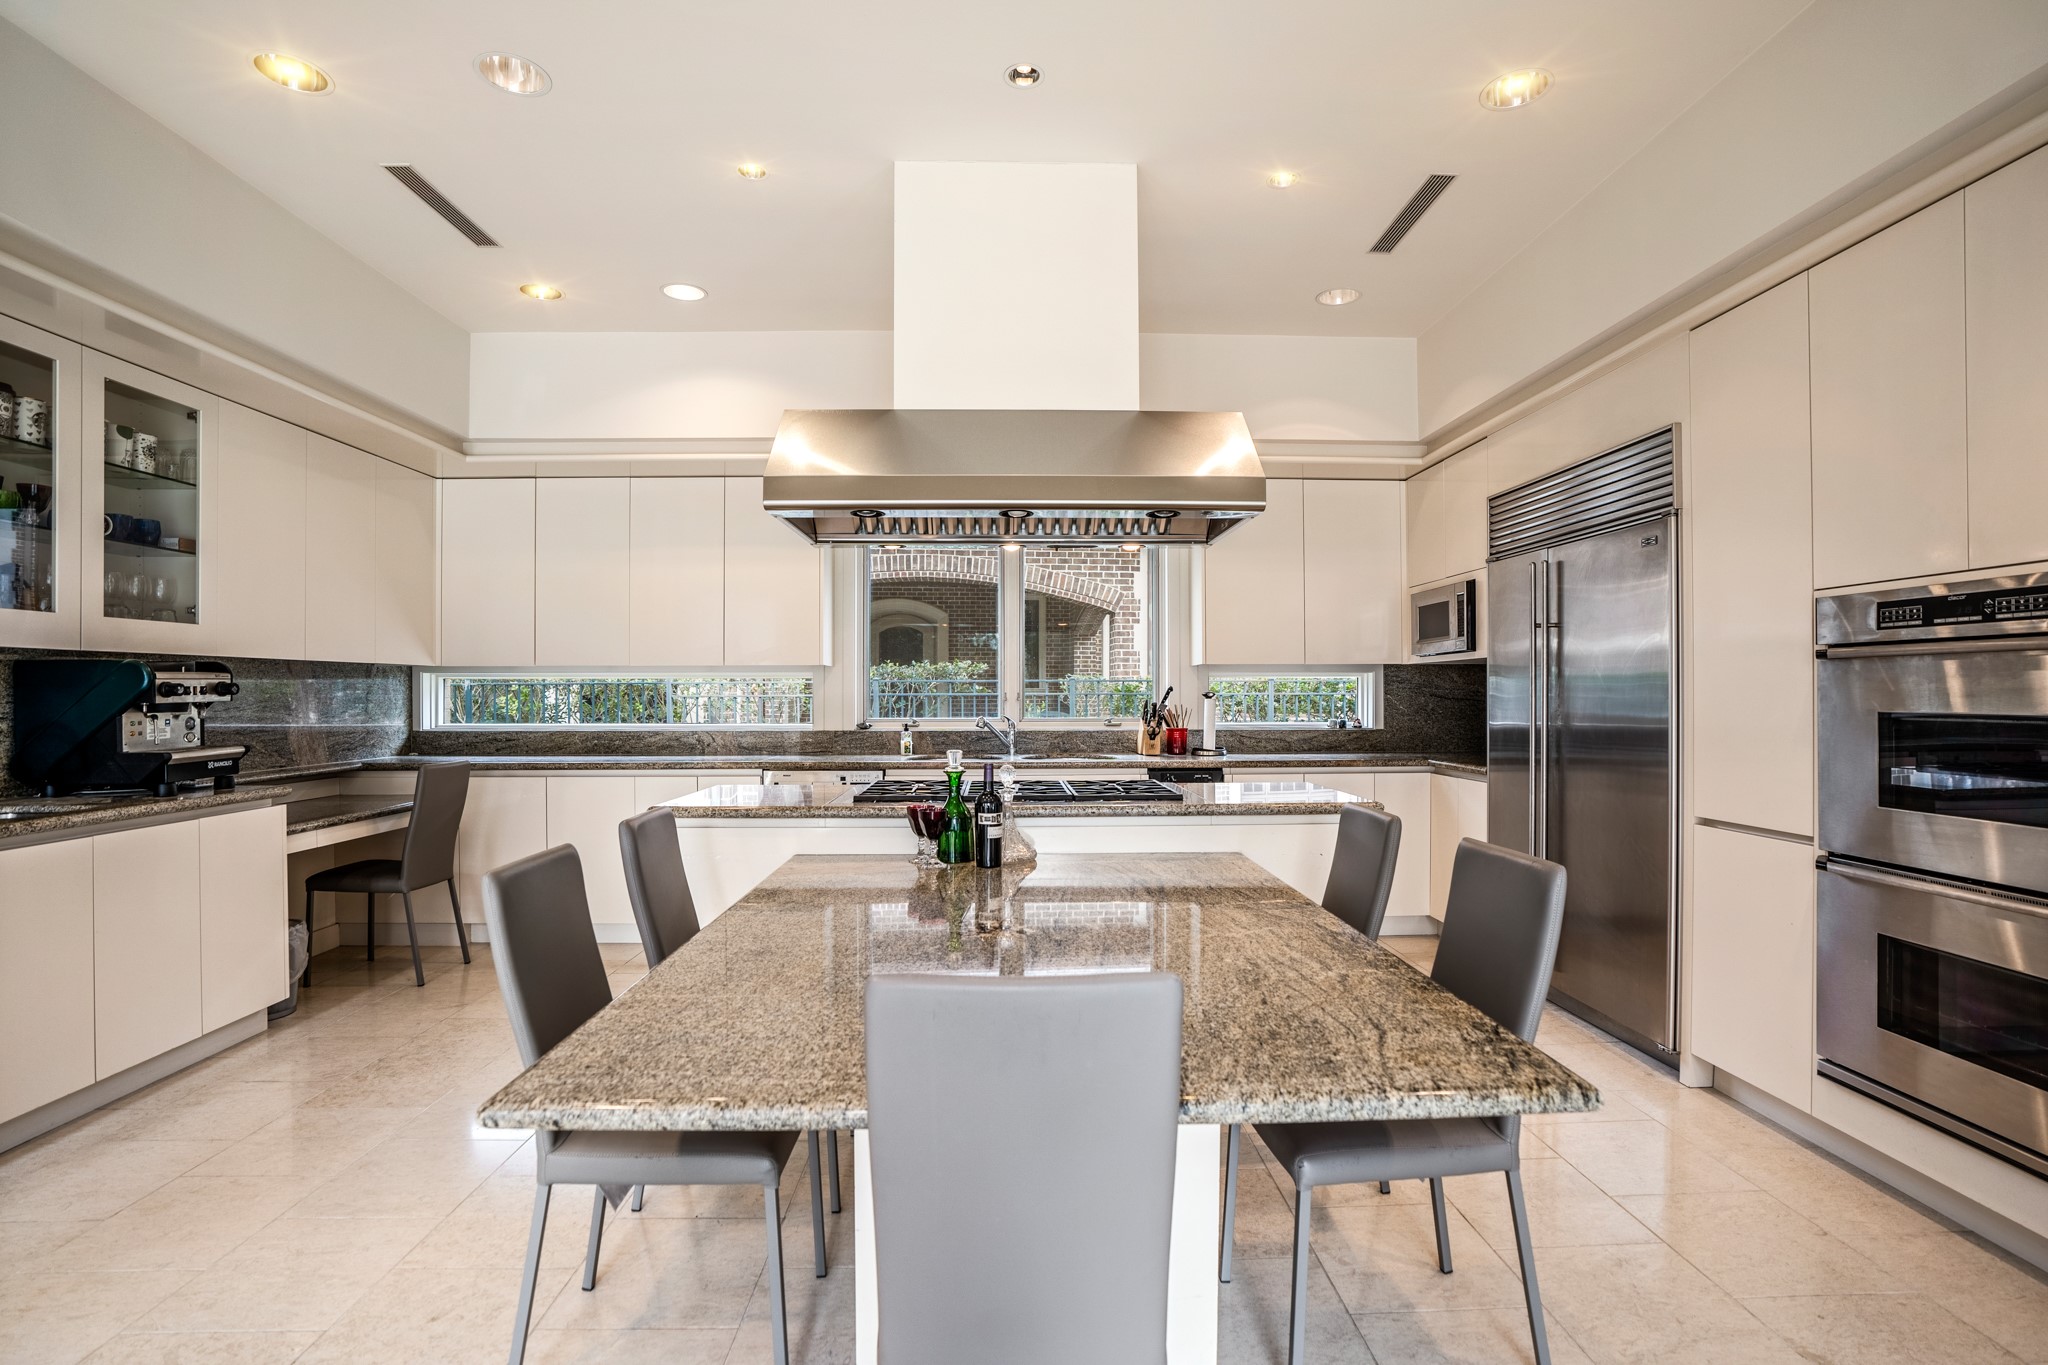 Timeless, classic cabinetry in this kitchen with double oven and built-in commercial-grade fridge. Granite table serves as an island and breakfast bar. Seats 5 people comfortably.